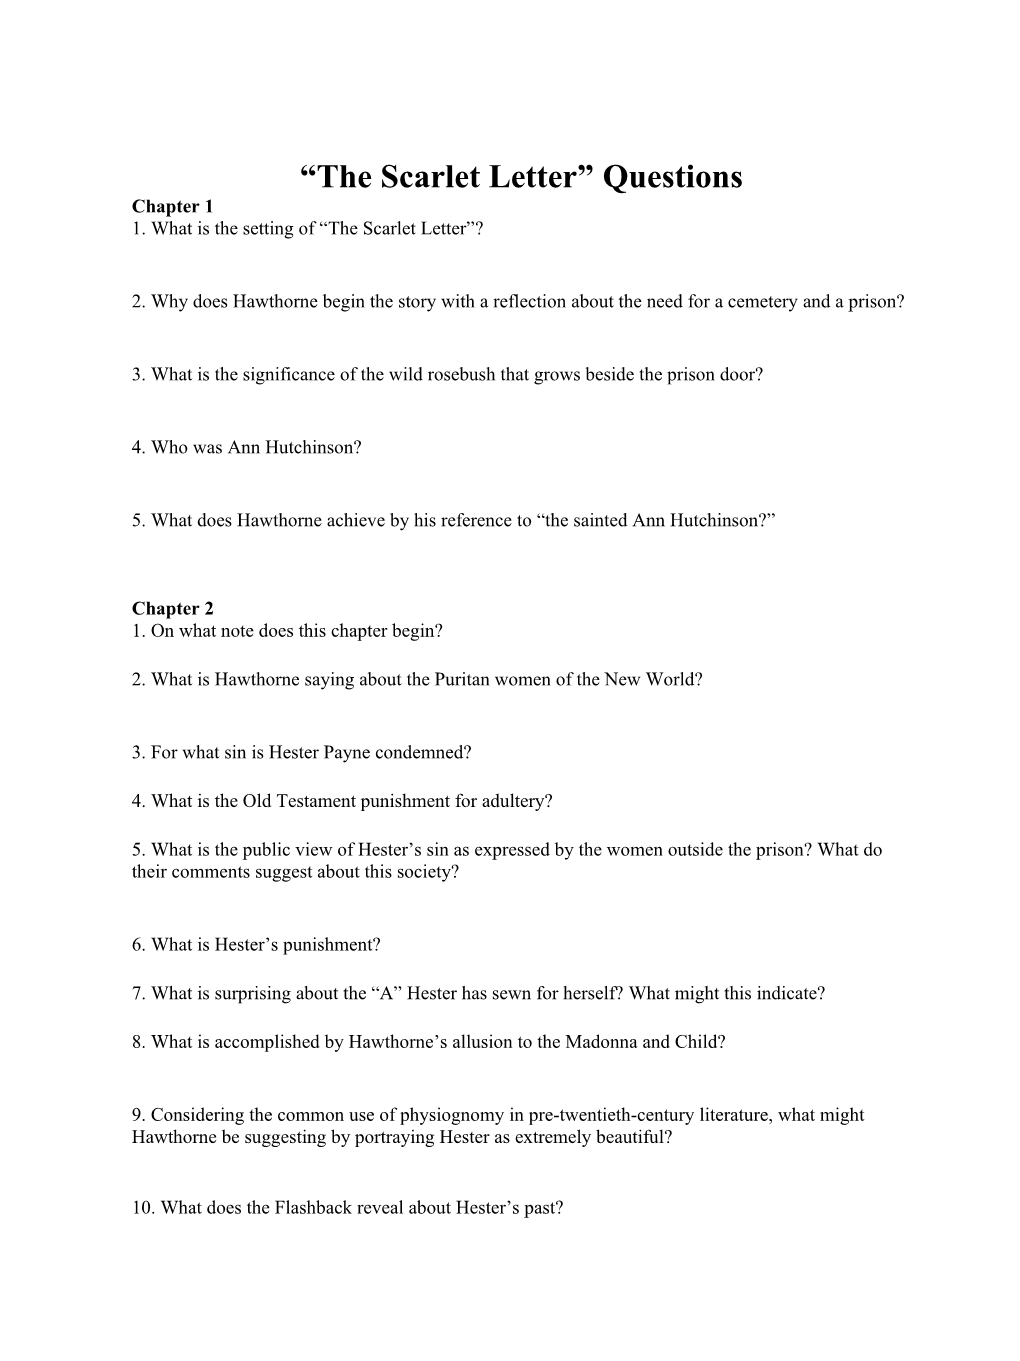 The Scarlet Letter Questions